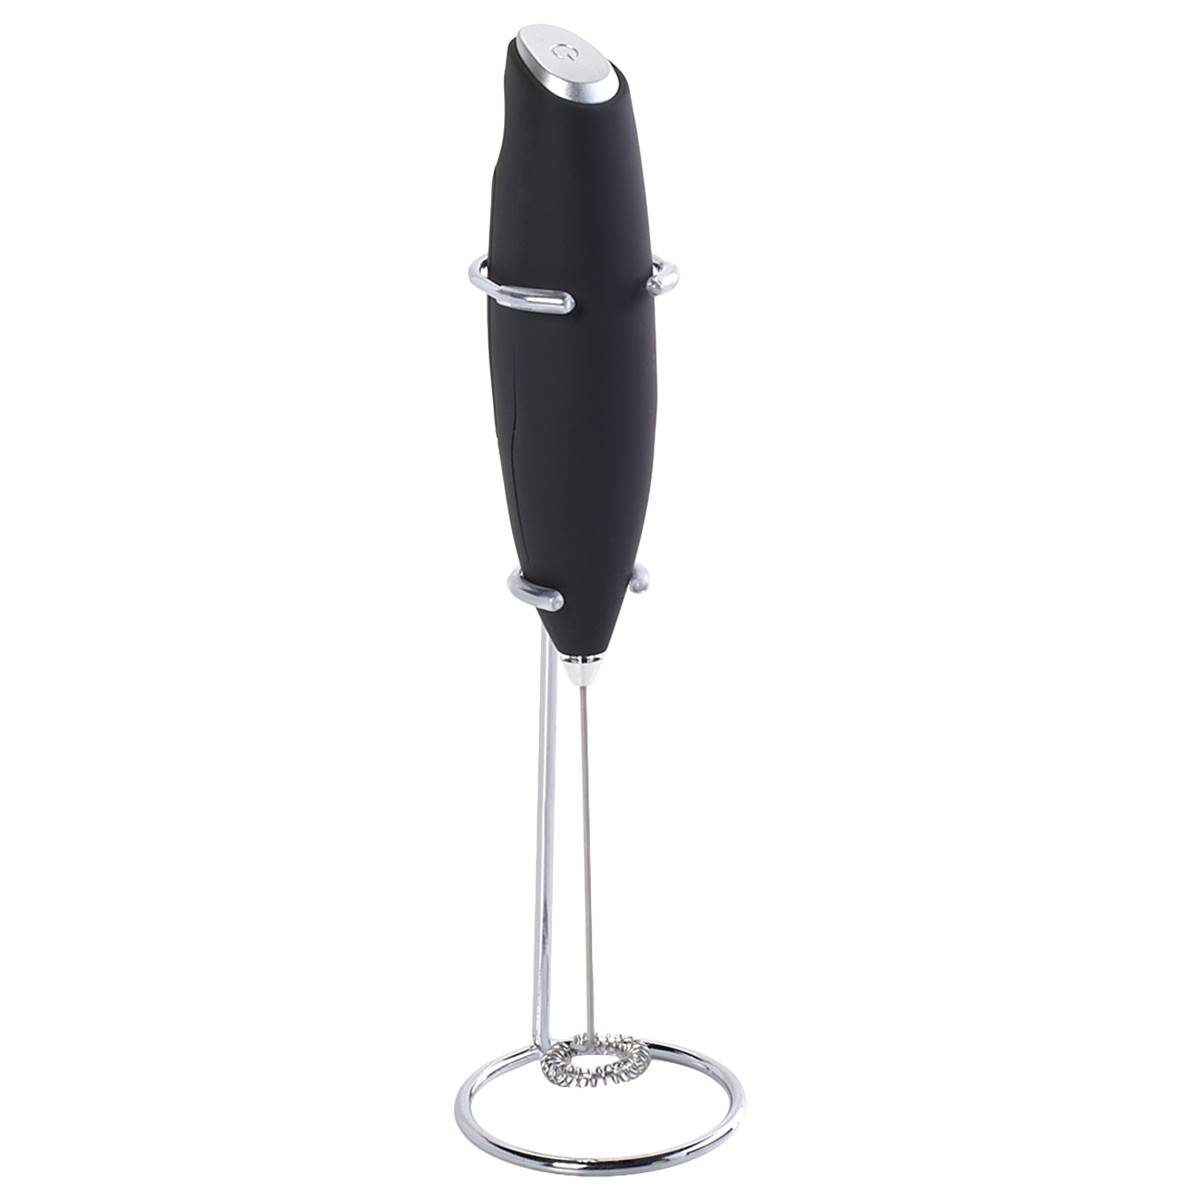 Farberware(R) Stainless Steel Milk Frother With Stand